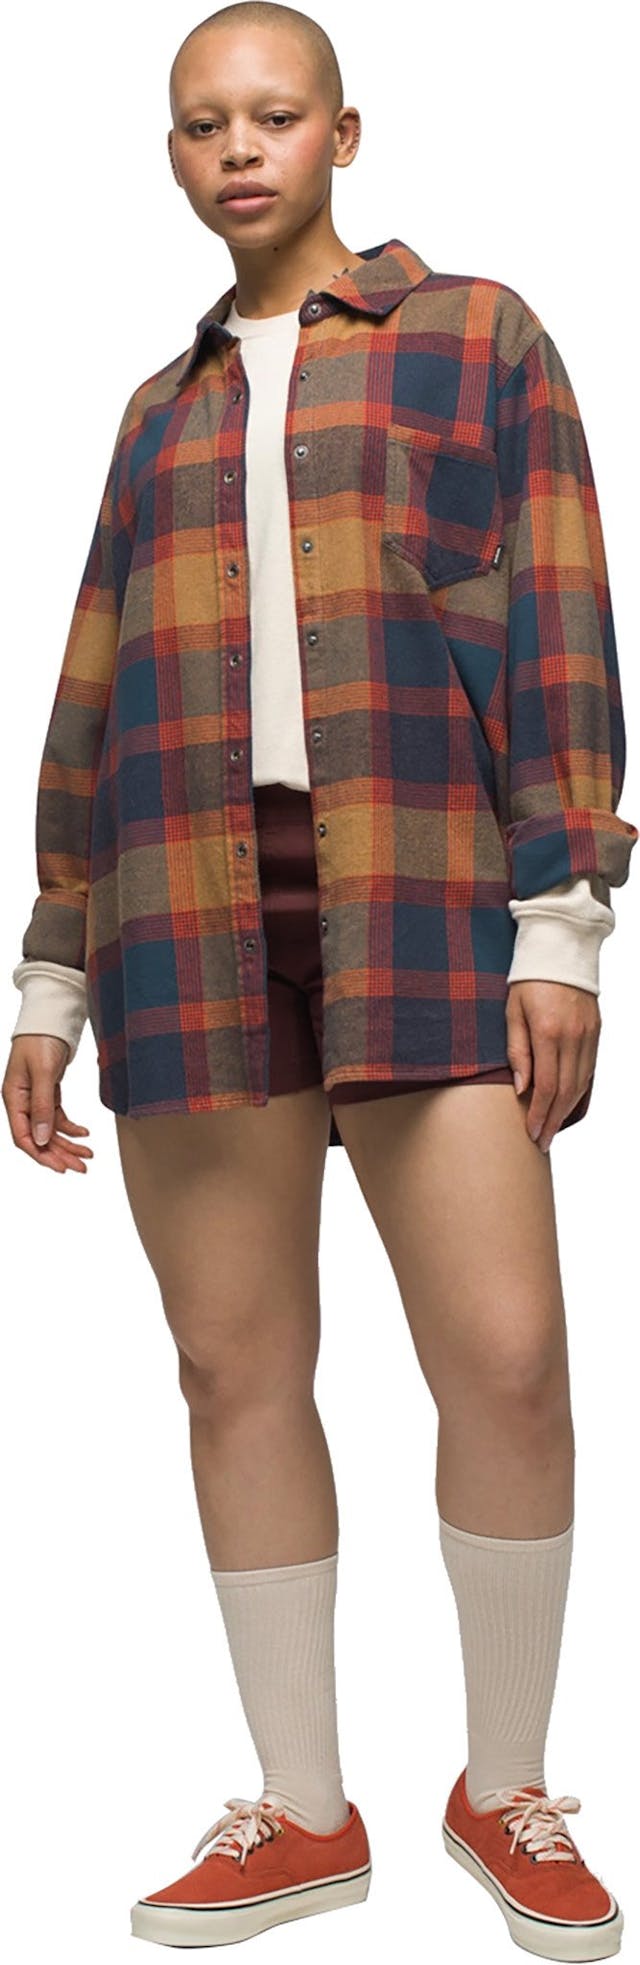 Product image for Golden Canyon Flannel Shirt - Women's